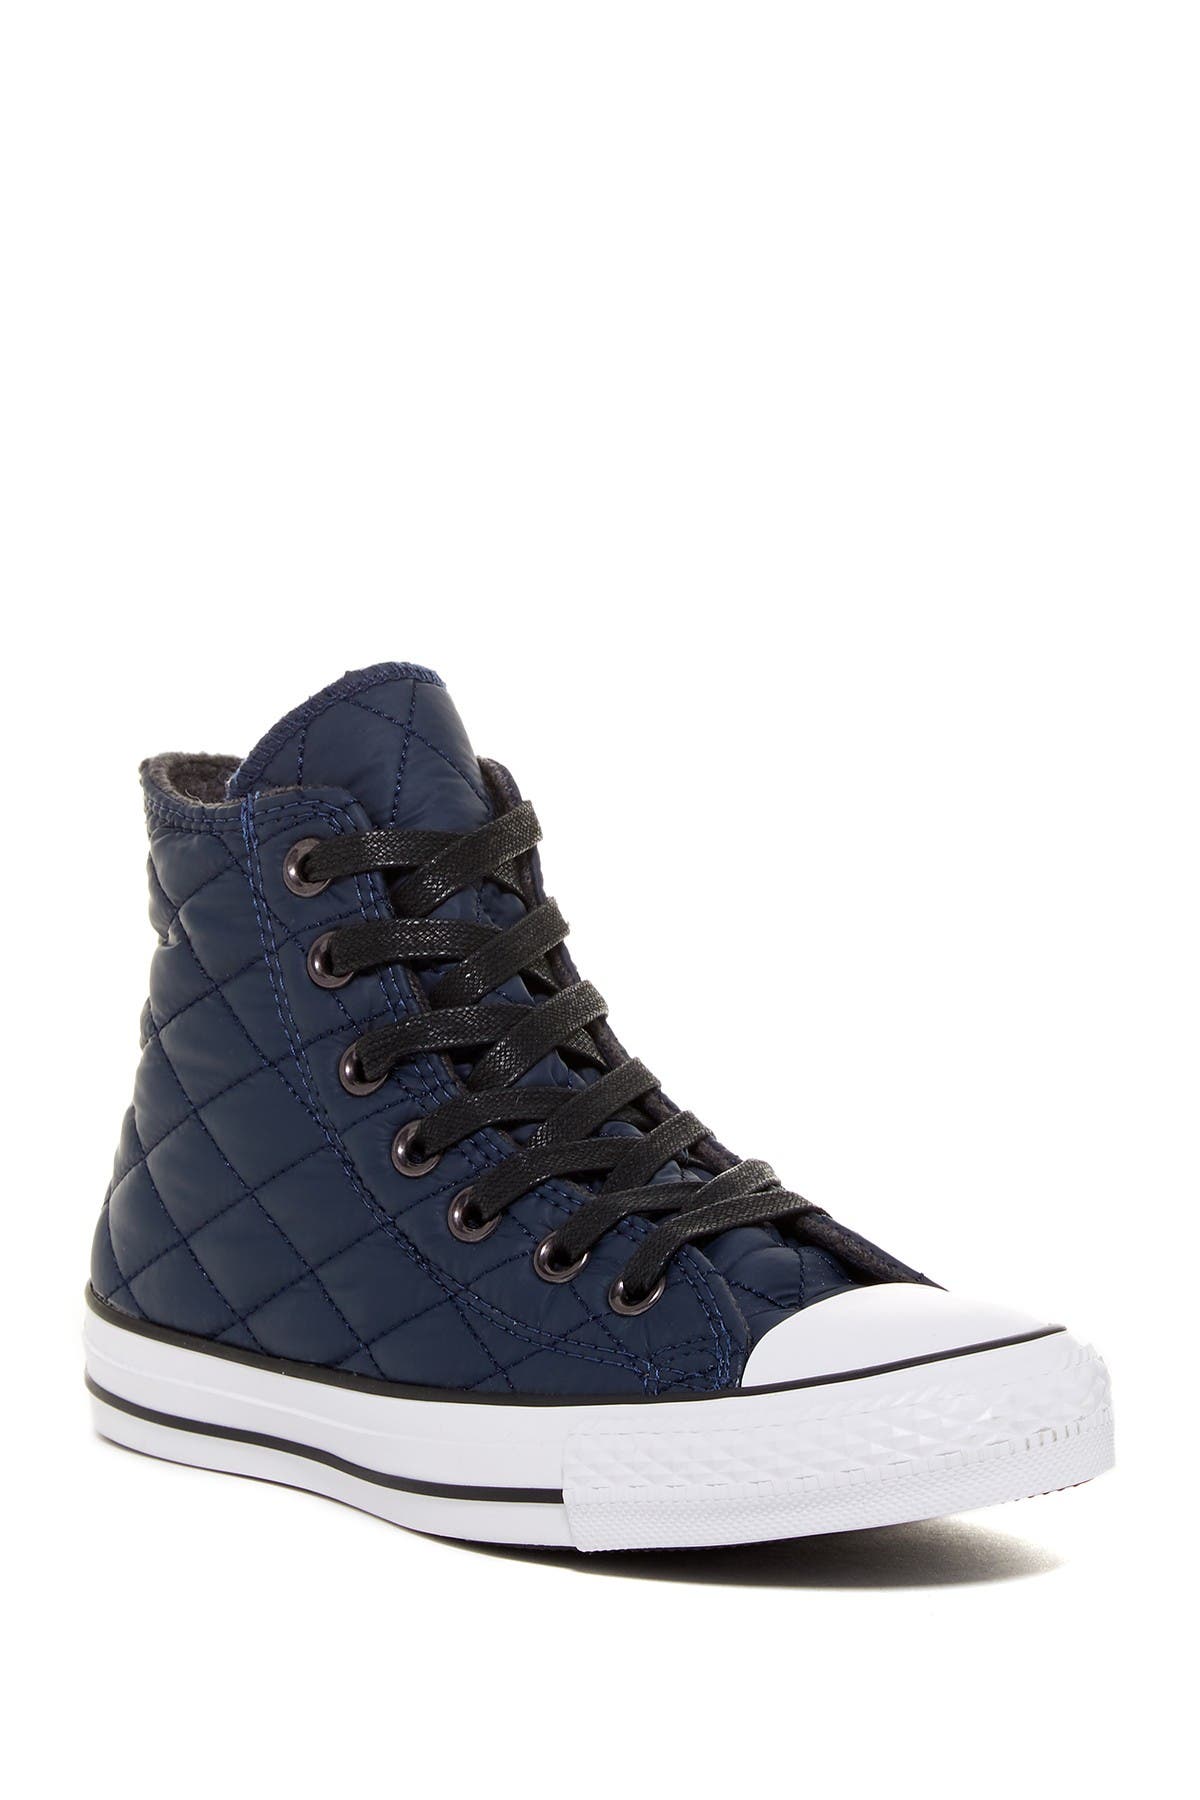 Converse | Chuck Taylor All Star Hi Top Quilted Sneakers | Nordstrom Rack